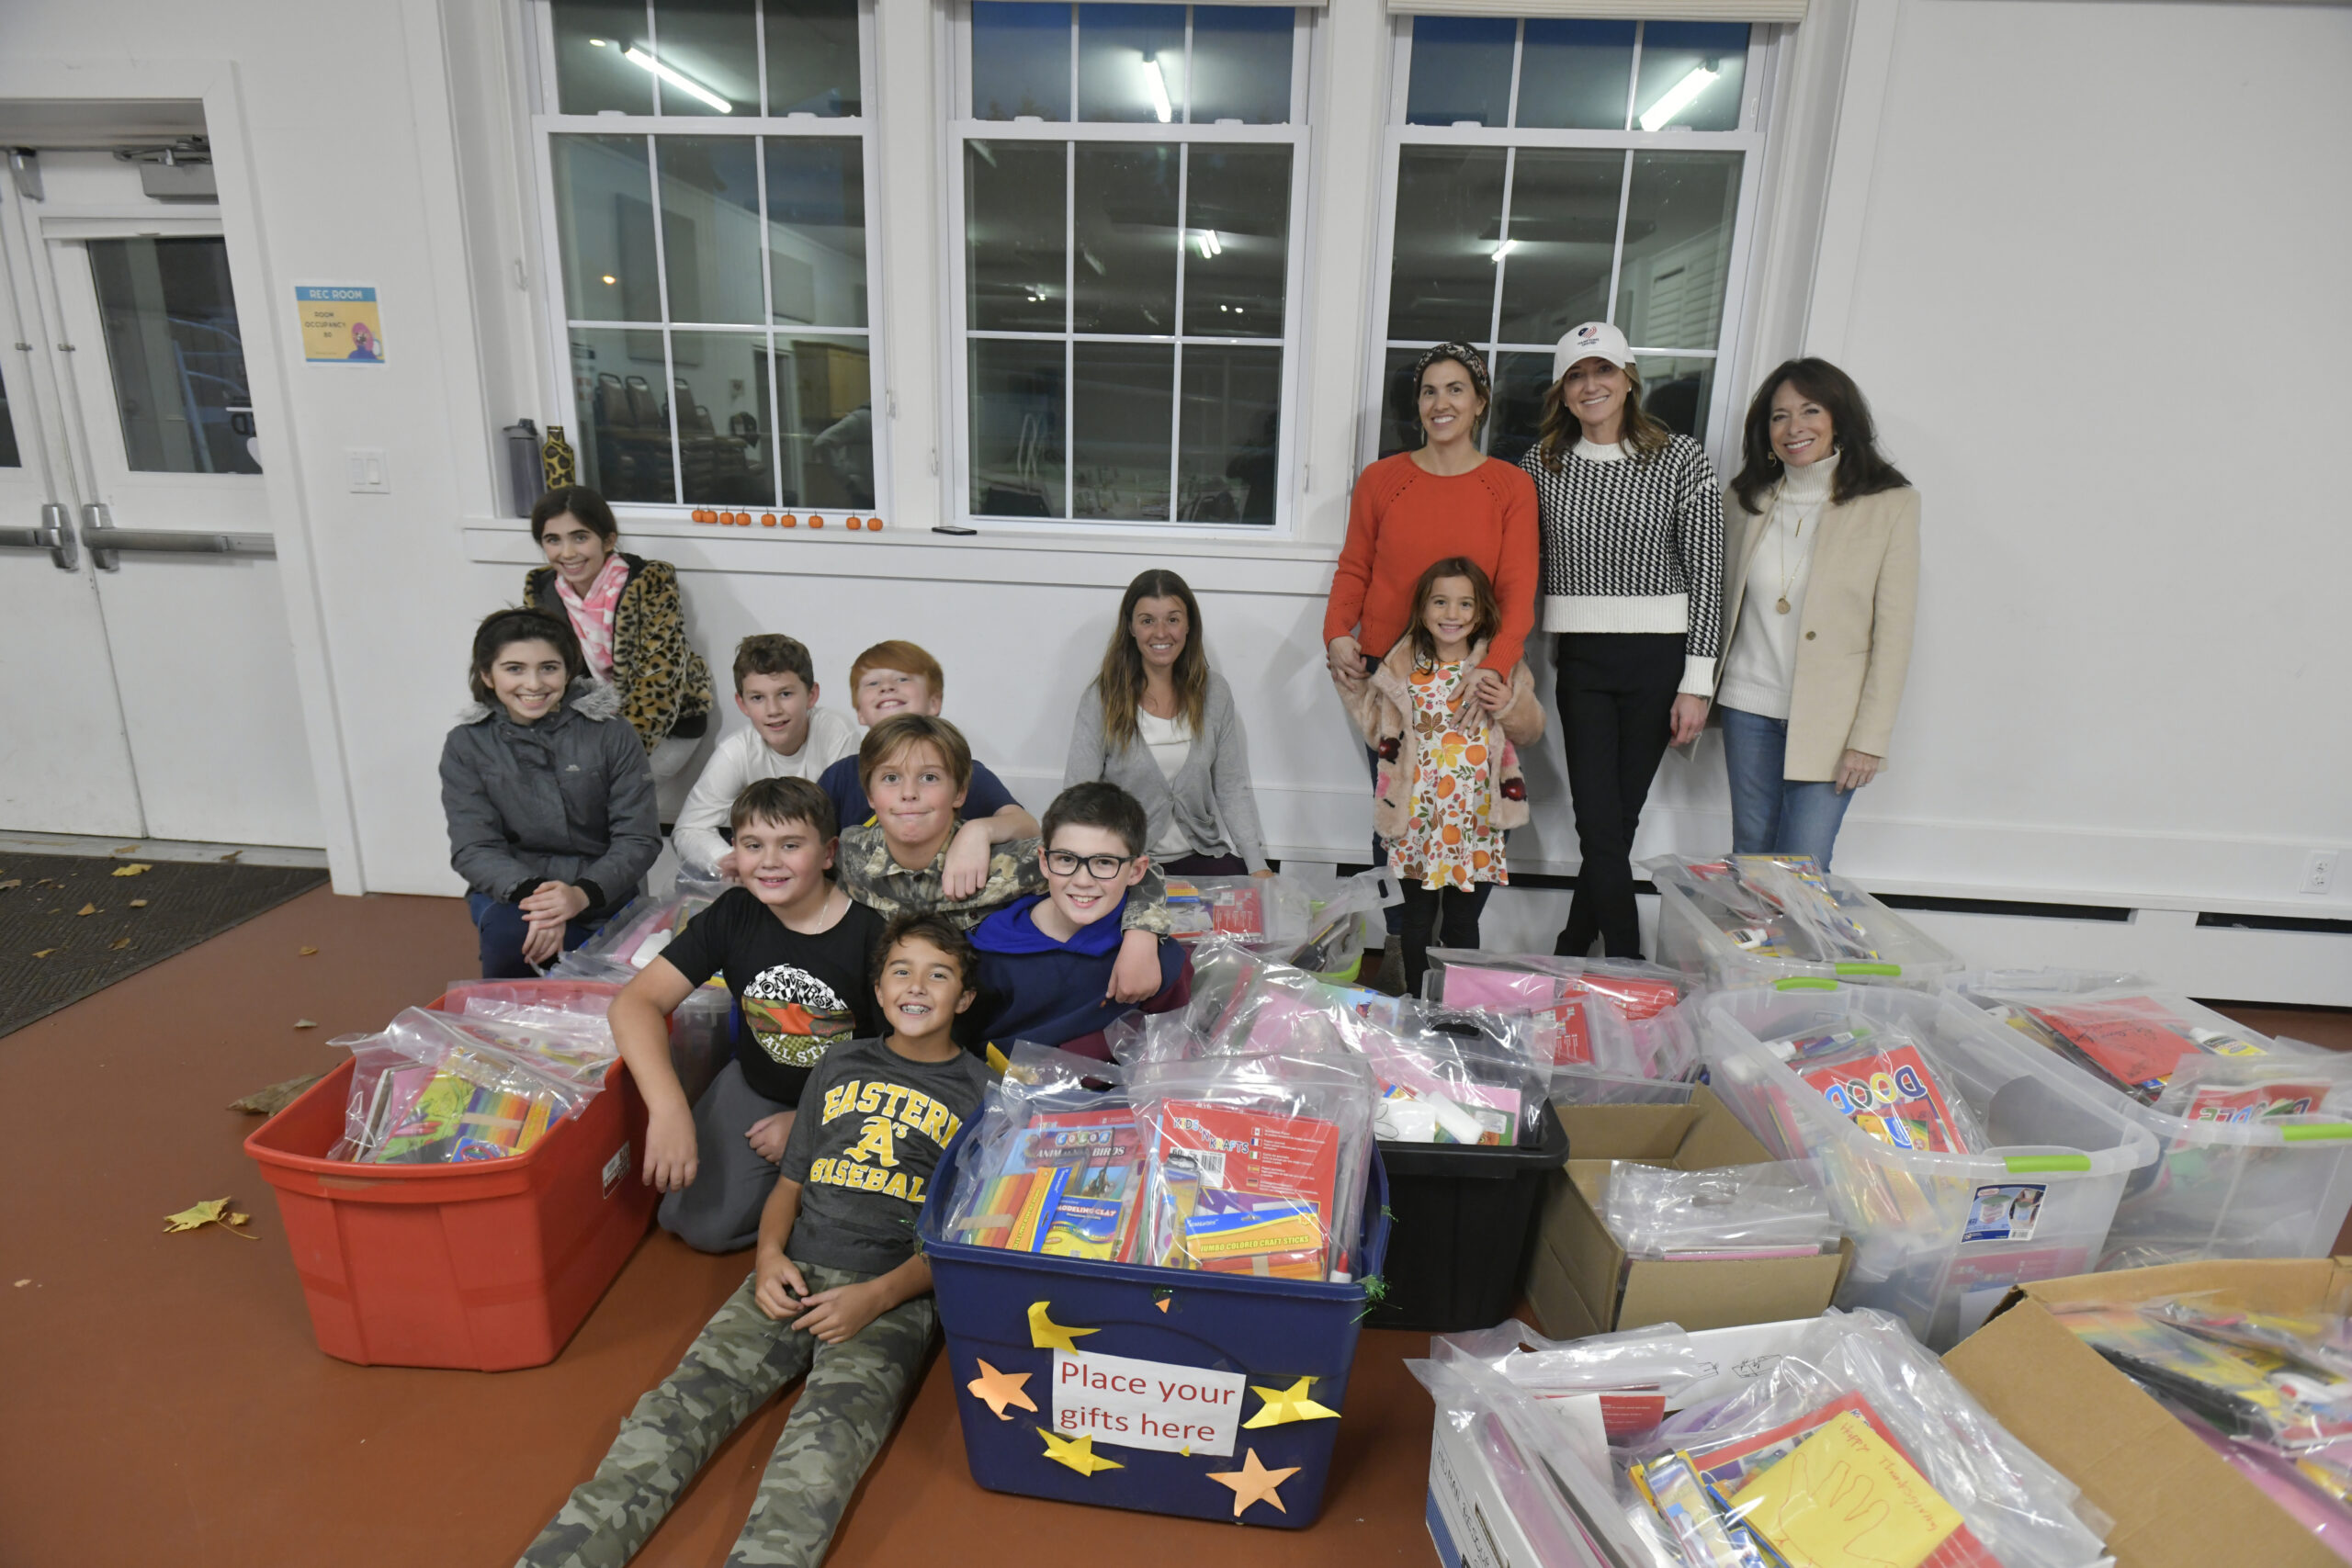 Supplies For Success, Hamptons United and Heart of the Hamptons, with the help of local students recently packed 350 